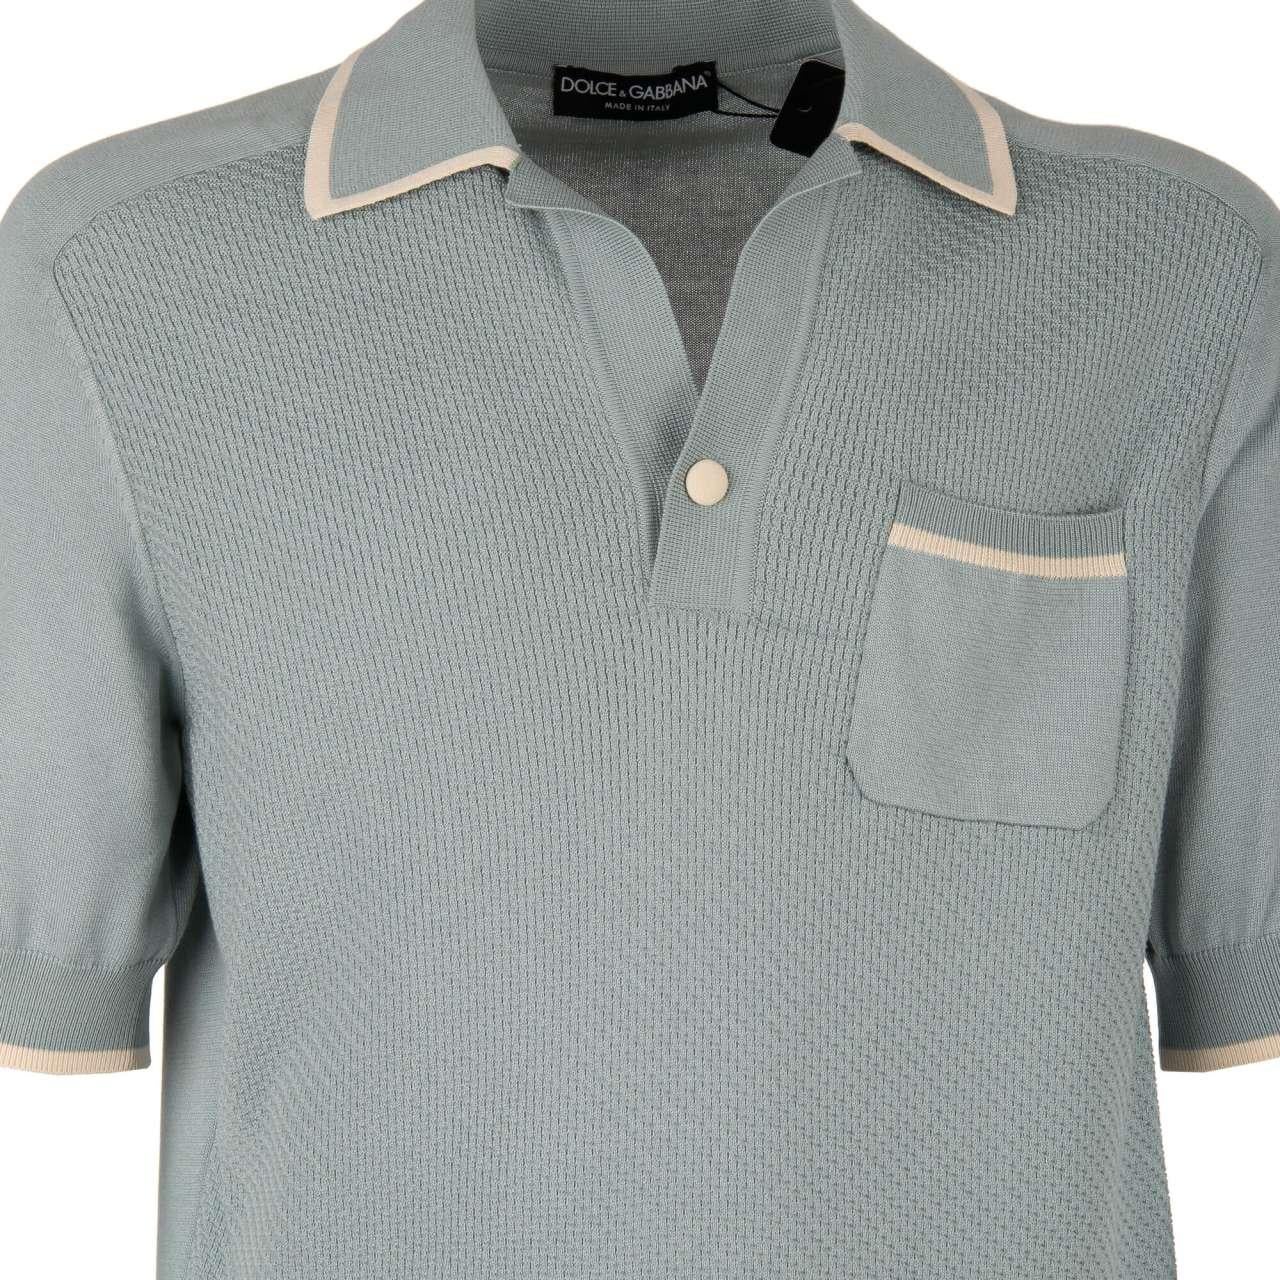 - Silk Blend Polo Shirt with contrast details in white and blue by DOLCE & GABBANA - New with Tags - MADE IN ITALY - Slim F- Polo collar - Button closure - Model: GX934T-JAMT8-S9000 - Material: 55% Silk, 45% Cotton - Color: Blue / White - Size: 48 /